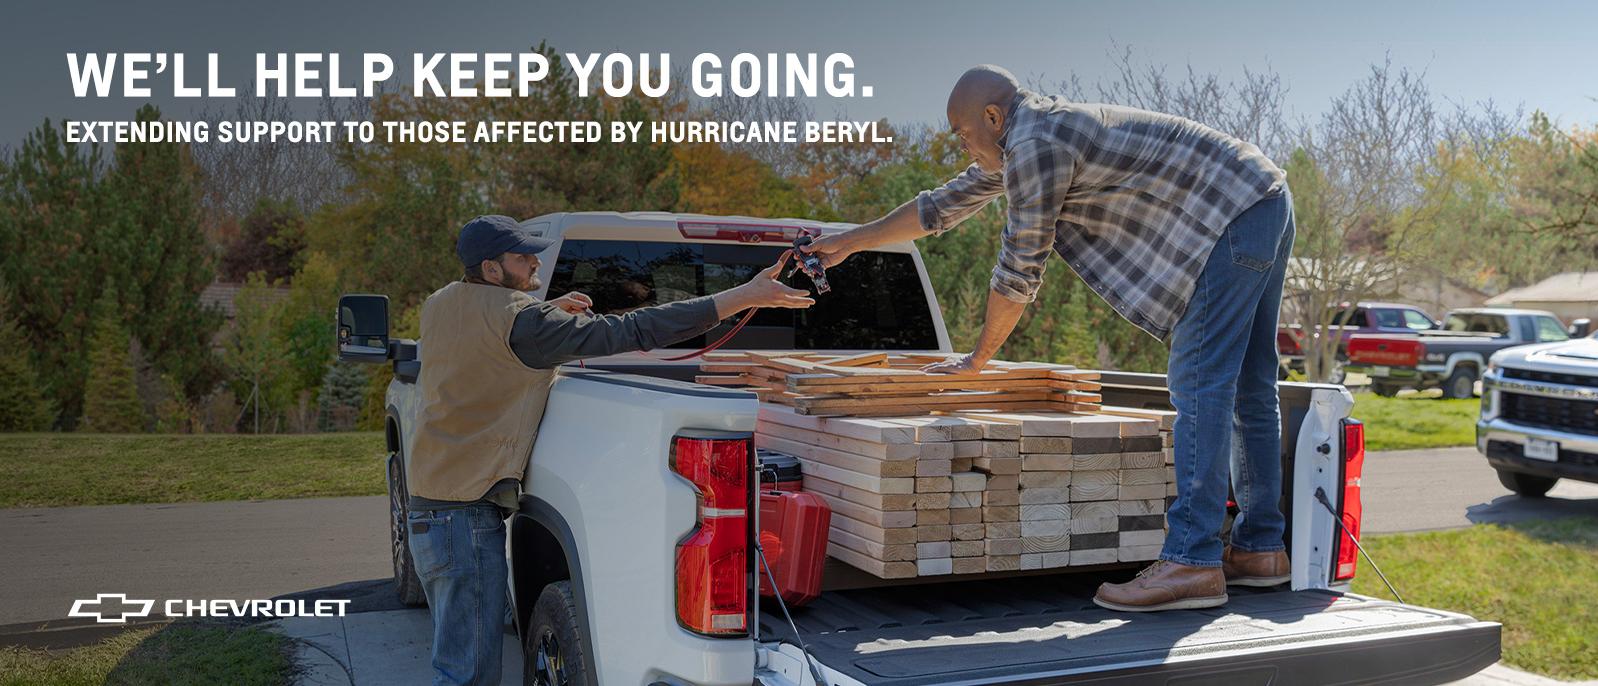 Extending support to those affected by Hurricane Beryl.